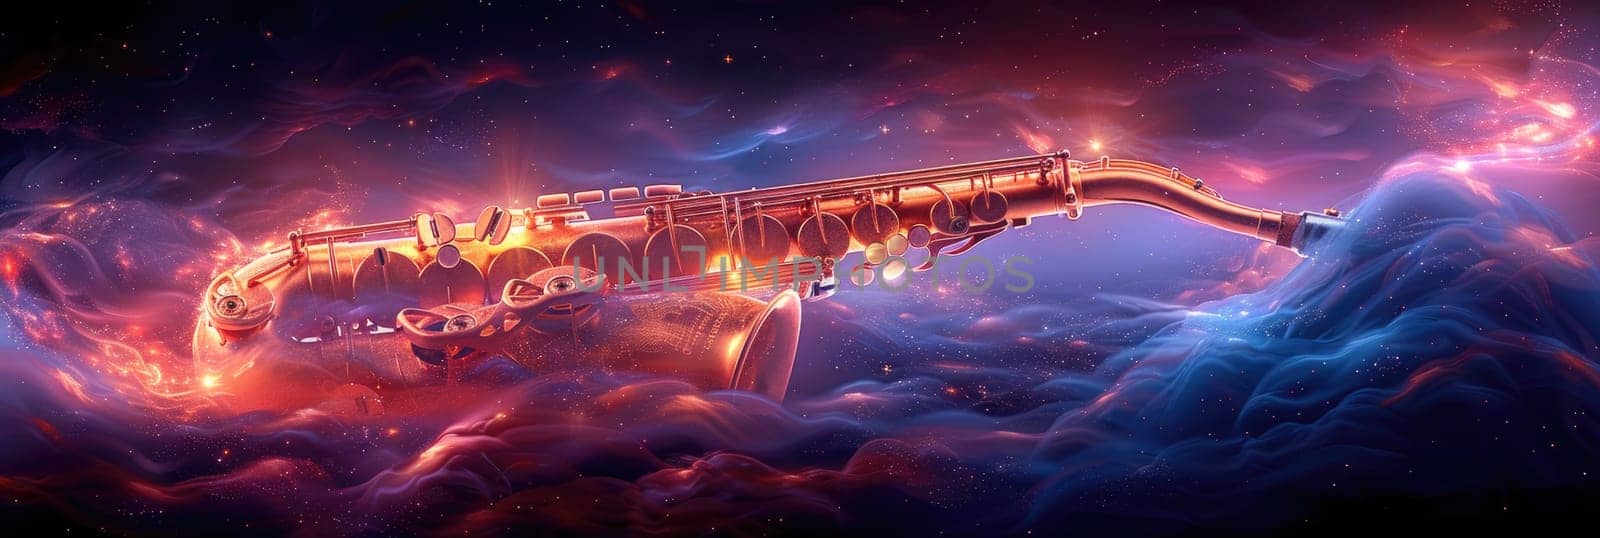 A surreal painting featuring a gun floating in the sky, creating a striking and thought-provoking image.